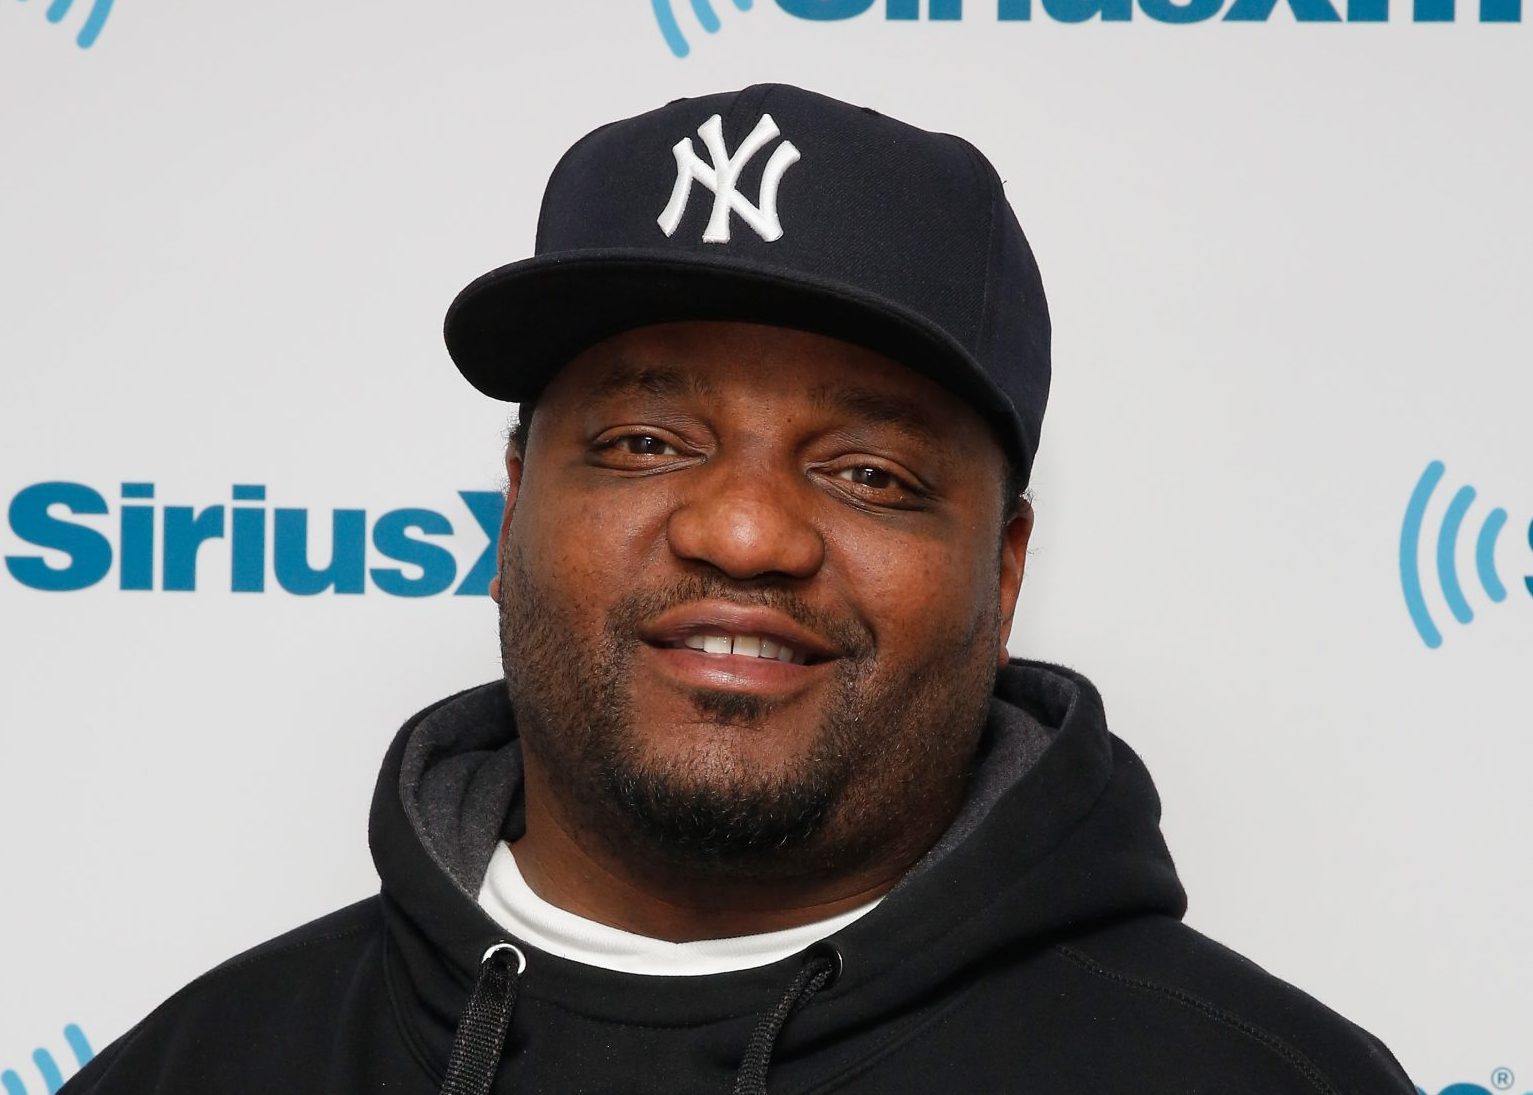 Aries Spears’ Mom Slams His “Haters” & Sends Her Support Amid Child Sex Abuse Allegations— “You’ll Be Richer”